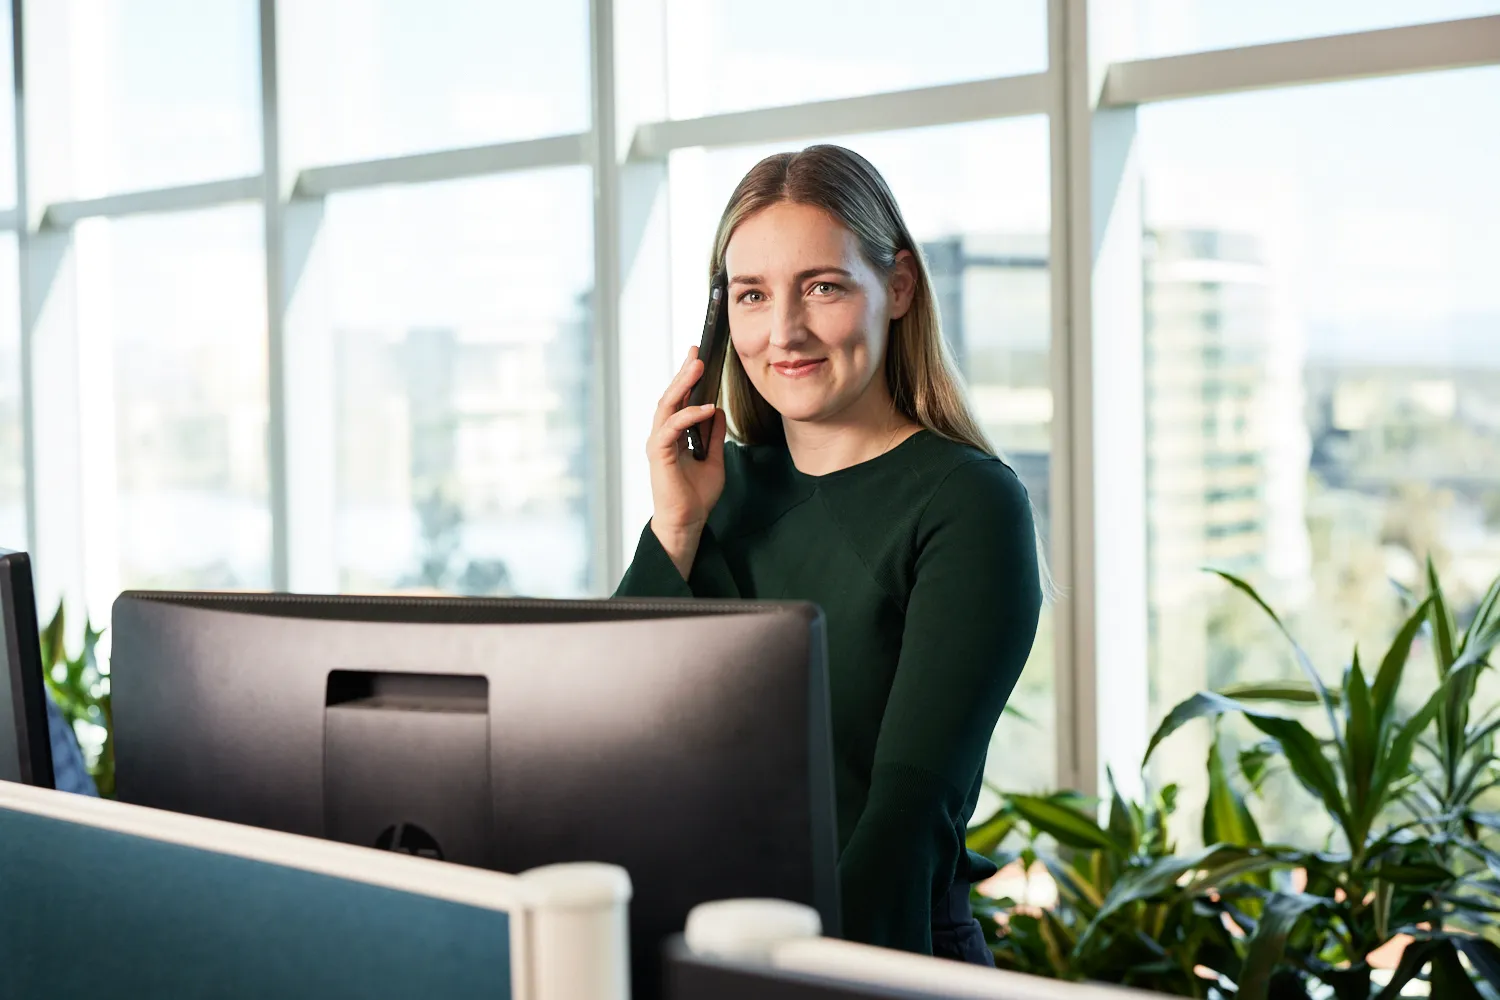 A smiling adult sitting at a computer and holding a phone to their ear